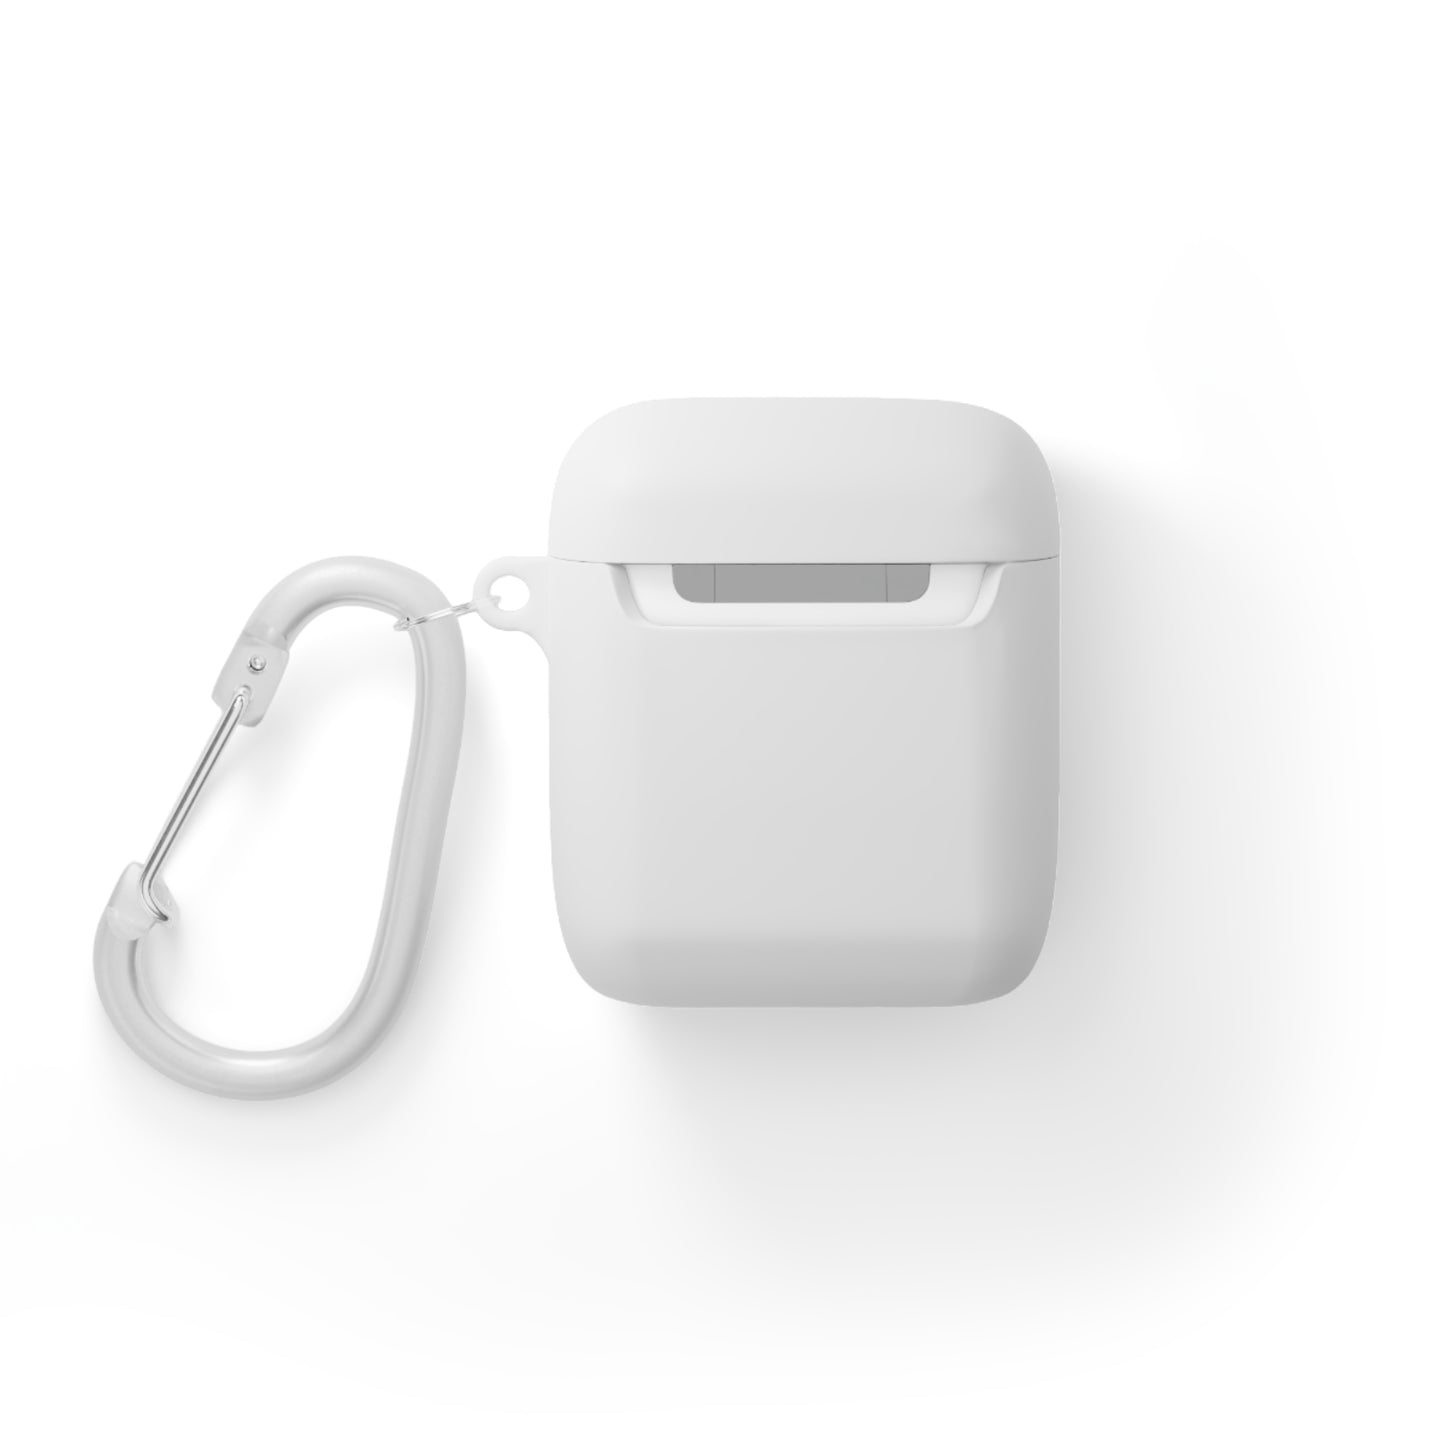 AirPods / AirPods Pro Case Cover -